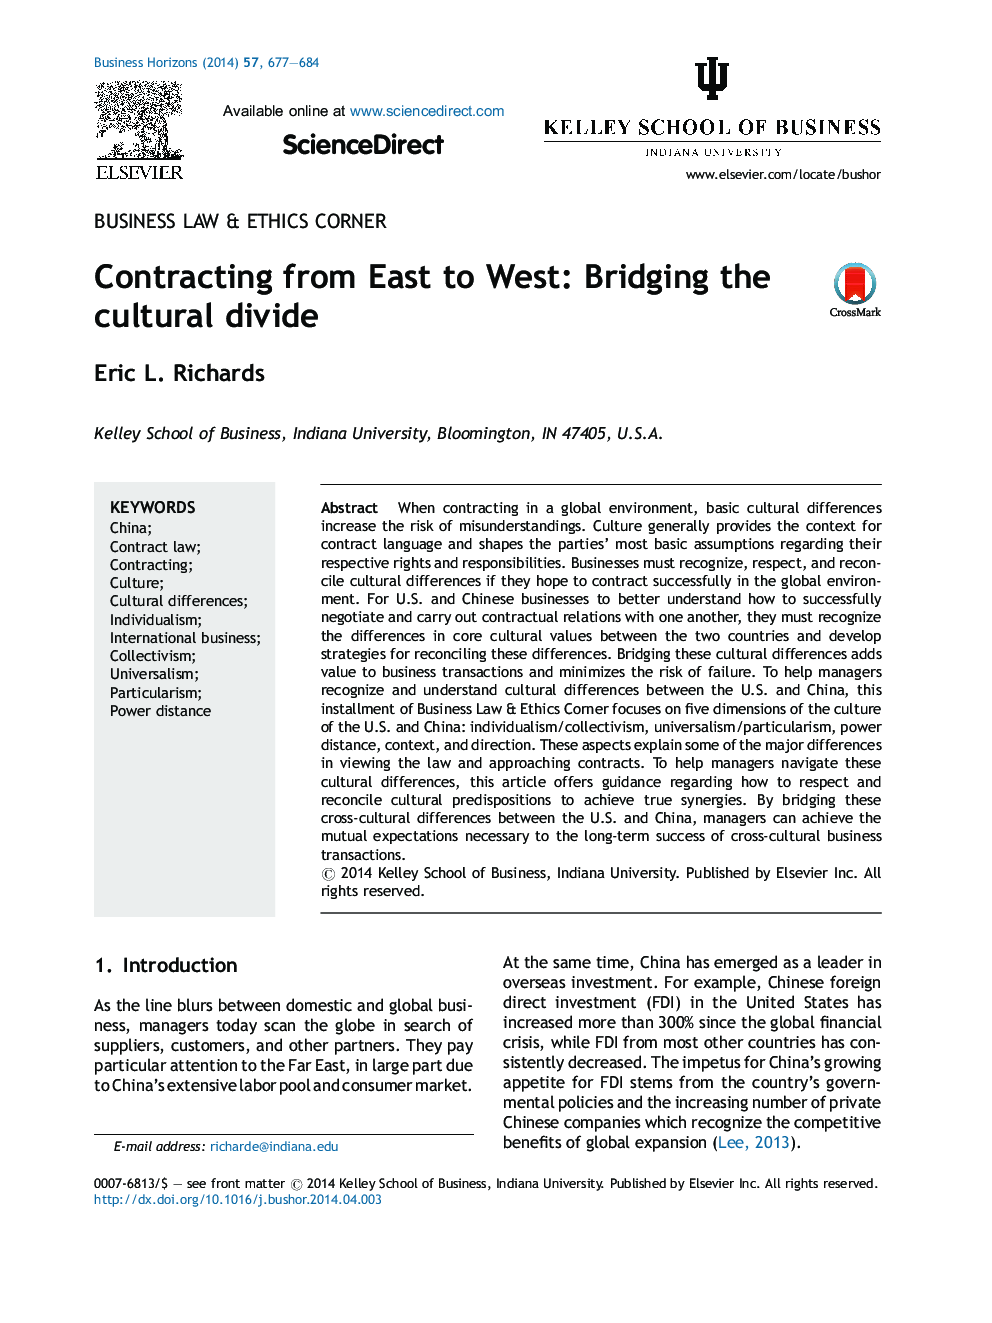 Contracting from East to West: Bridging the cultural divide